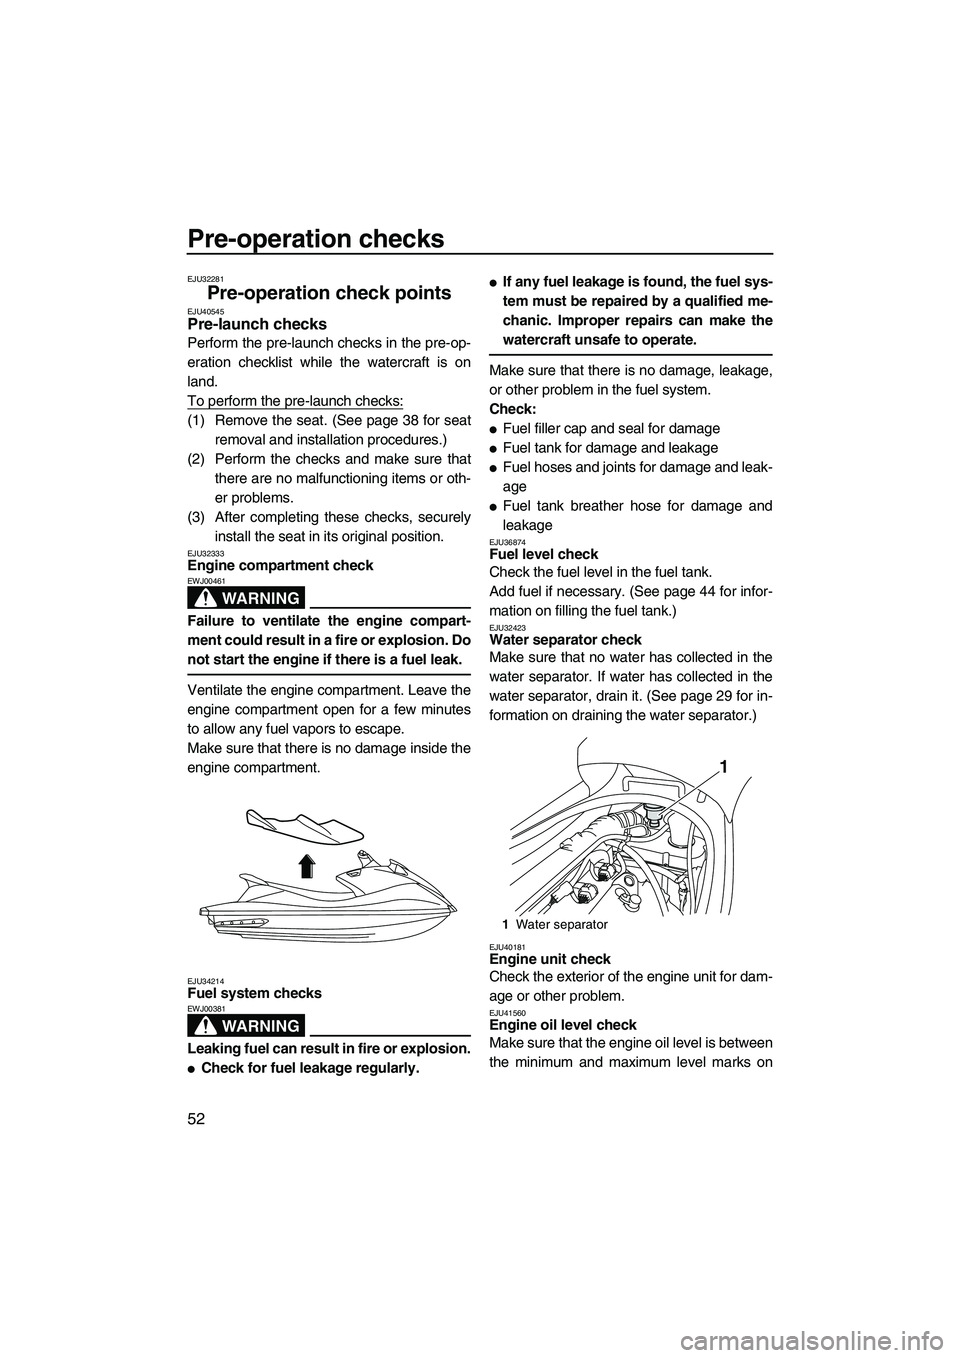 YAMAHA VX DELUXE 2013  Owners Manual Pre-operation checks
52
EJU32281
Pre-operation check points EJU40545Pre-launch checks 
Perform the pre-launch checks in the pre-op-
eration checklist while the watercraft is on
land.
To perform the pr